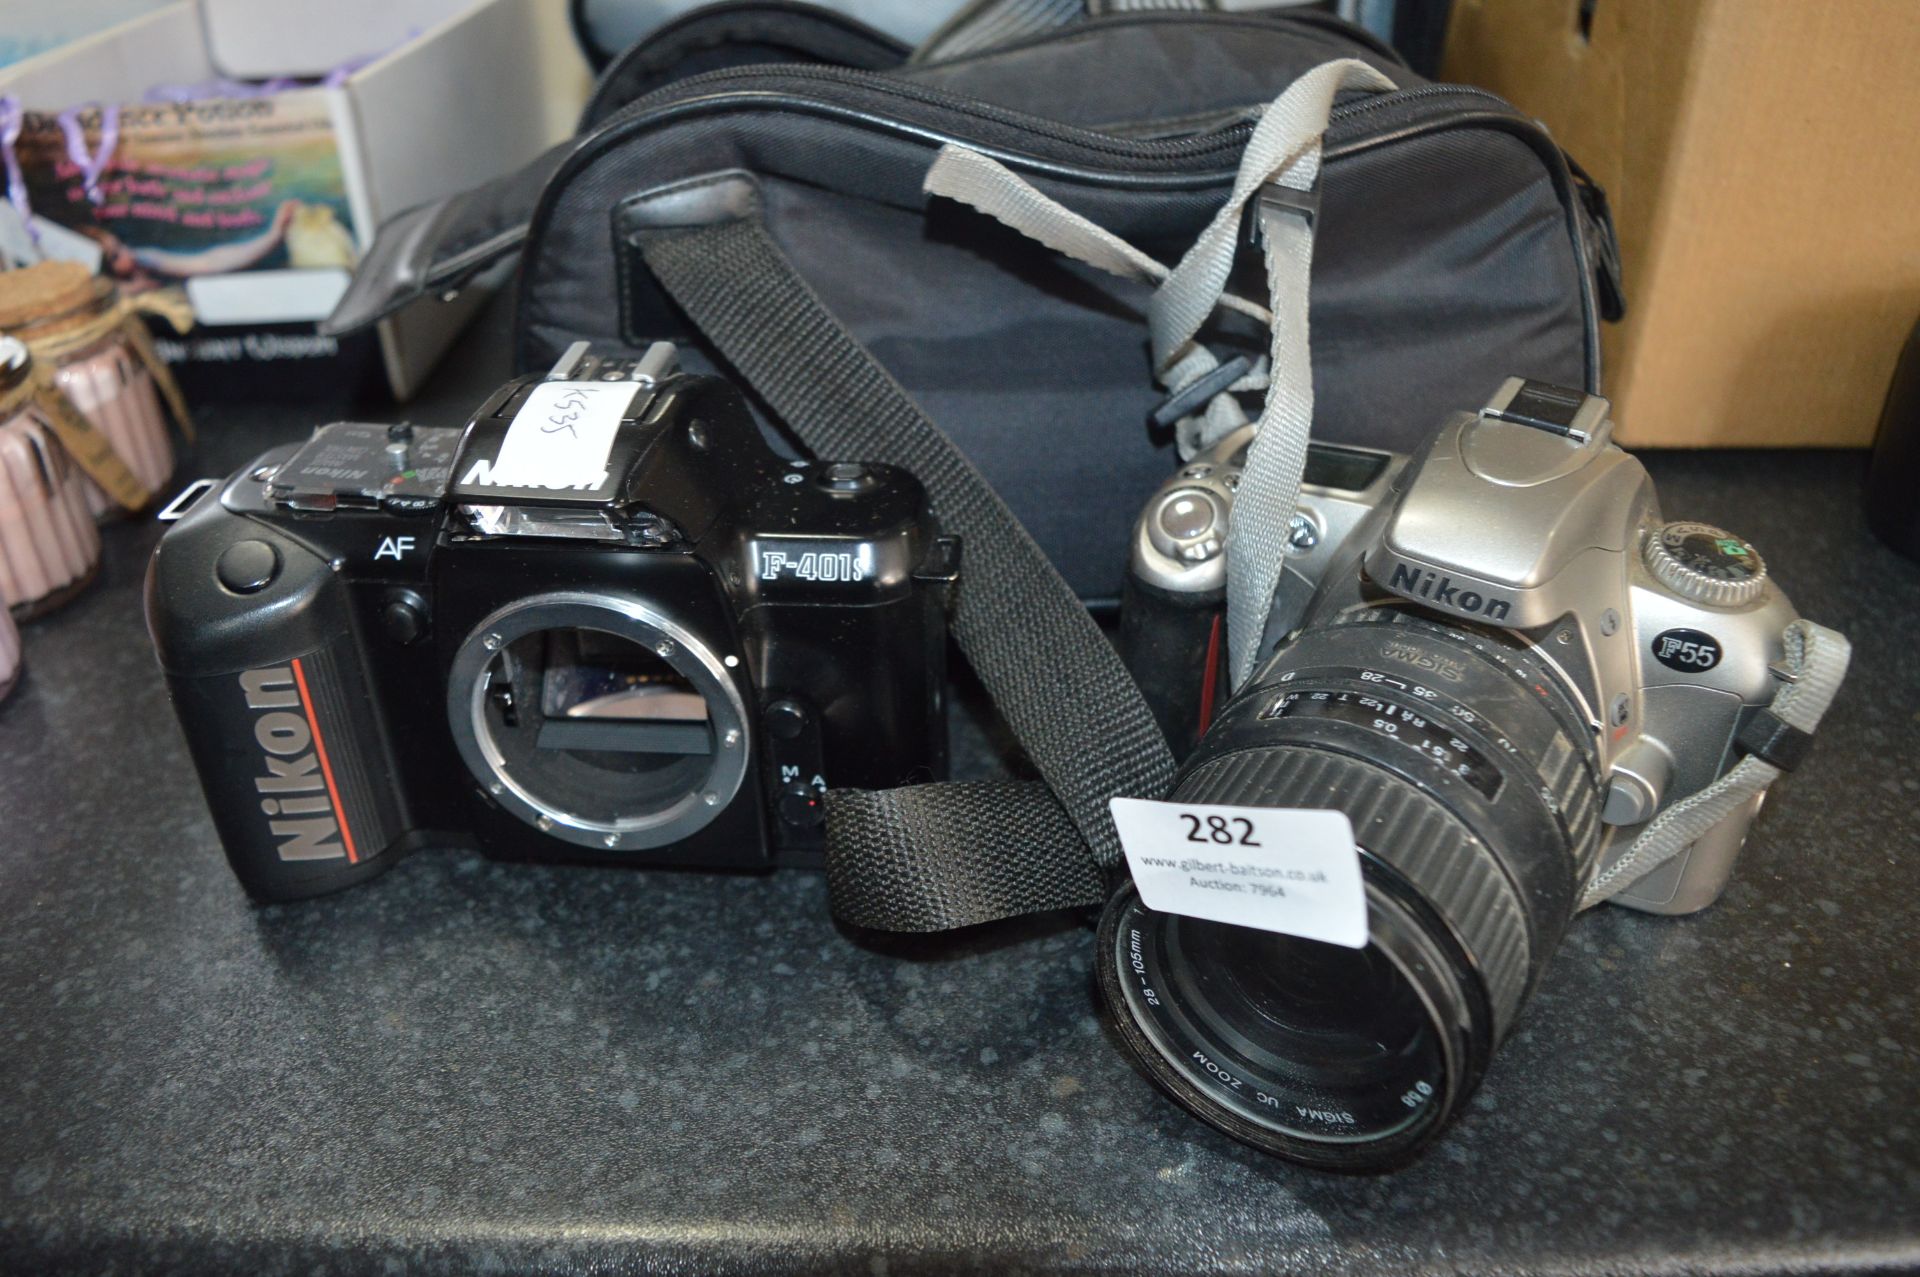 Two Nikon Cameras F55 and F401 with Travel Case